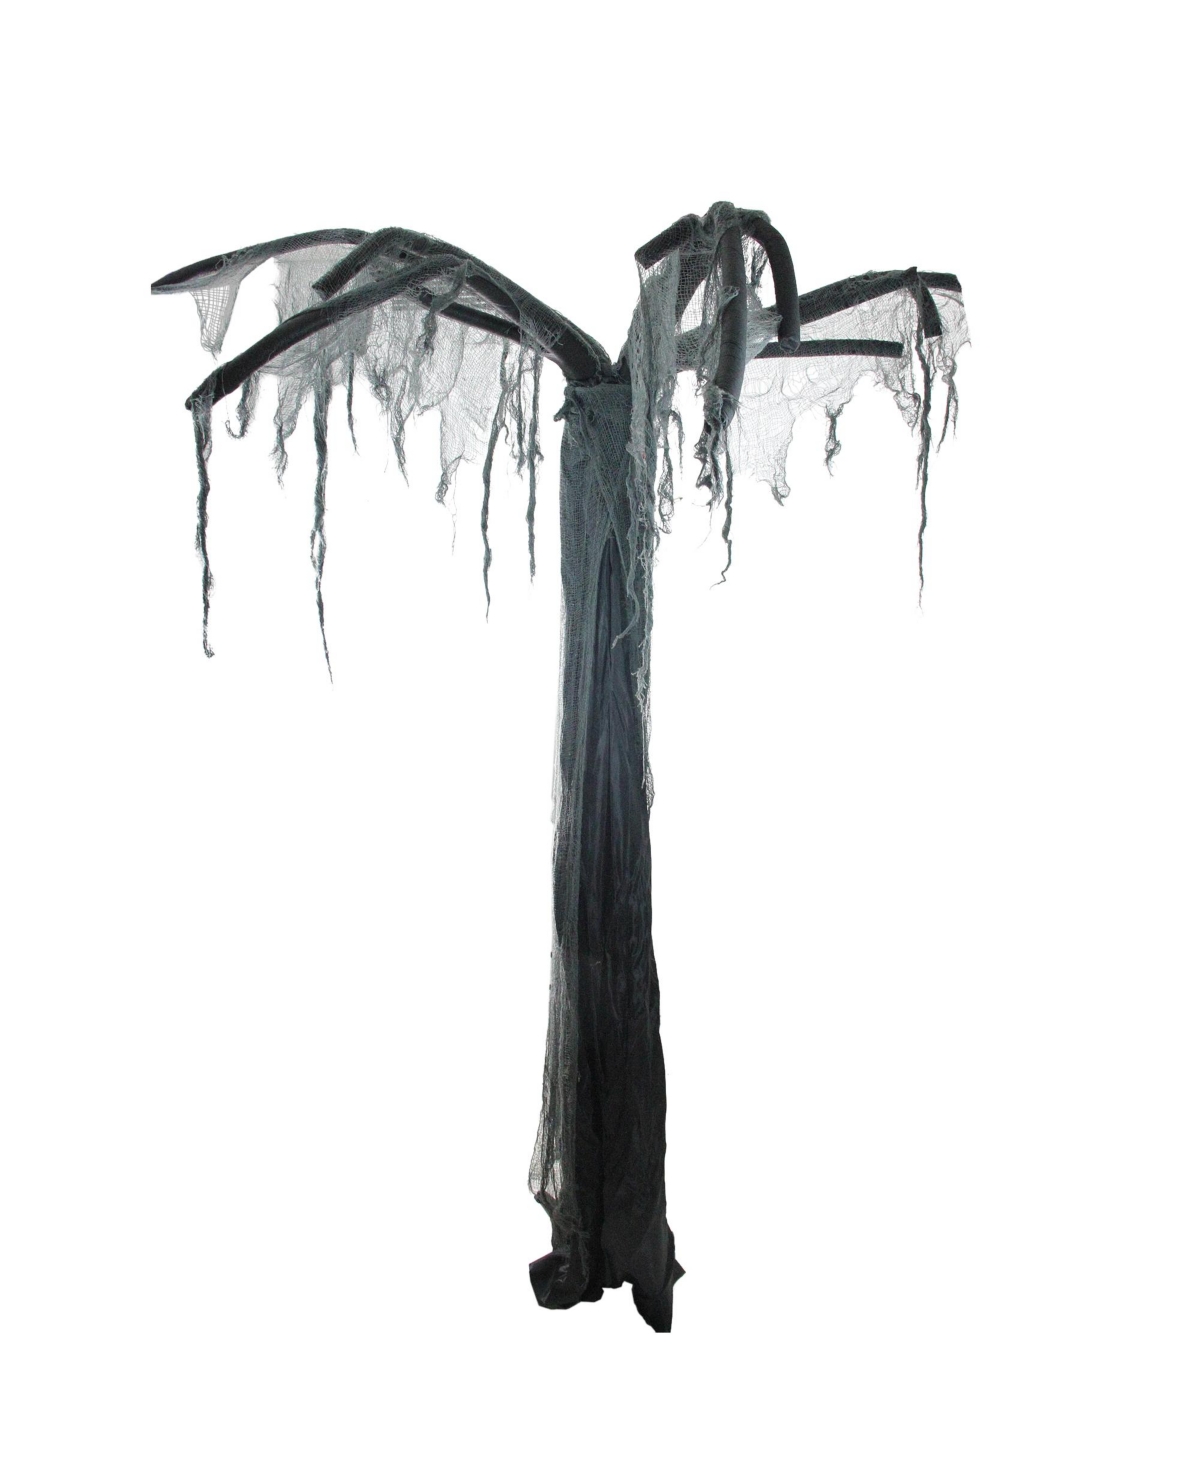 Northlight Spooky Standing Ghost Tree Halloween Decoration, 7.5' In Black